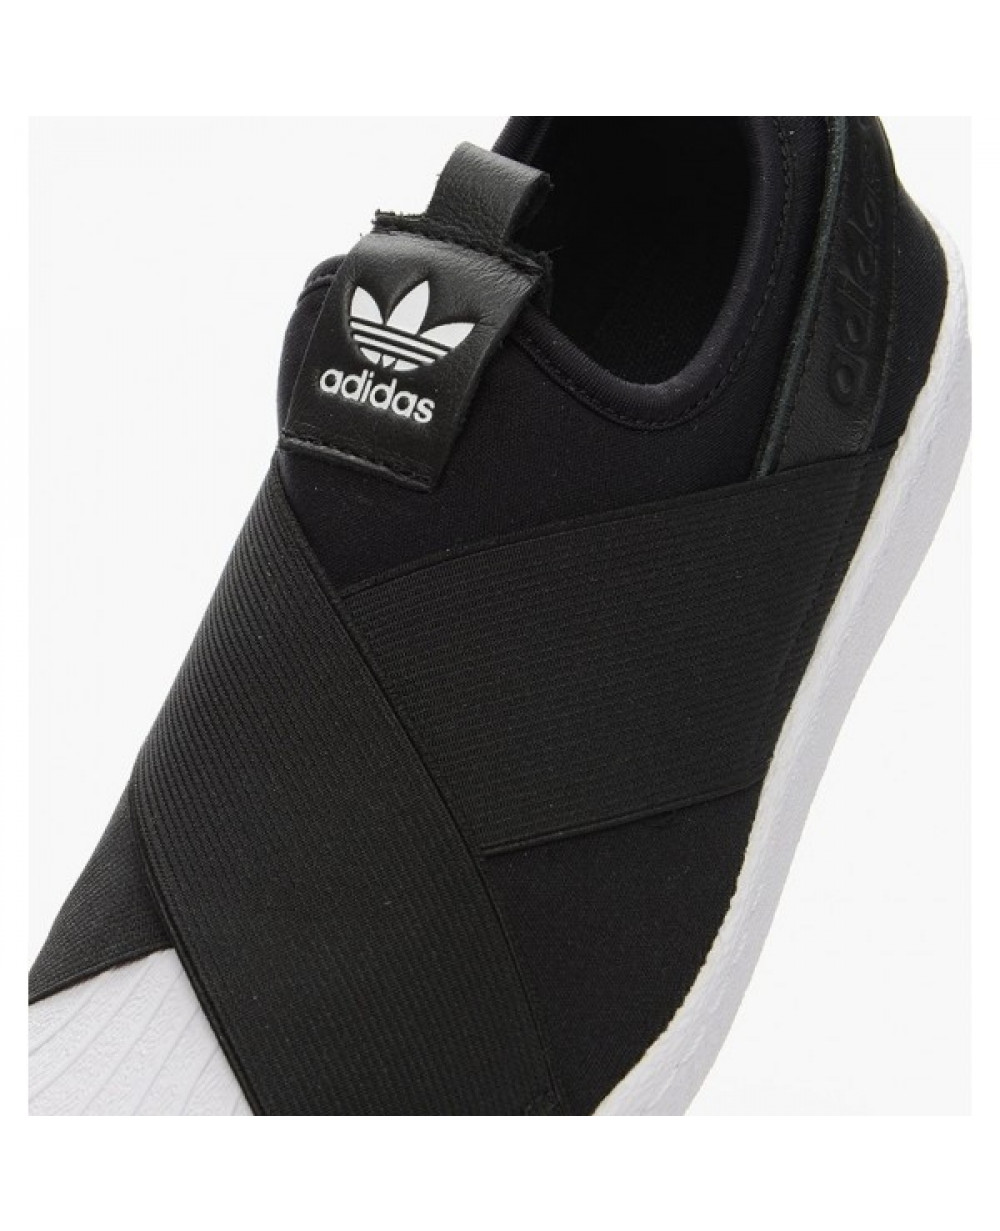 Adidas Superstar Slip on Shoes For 